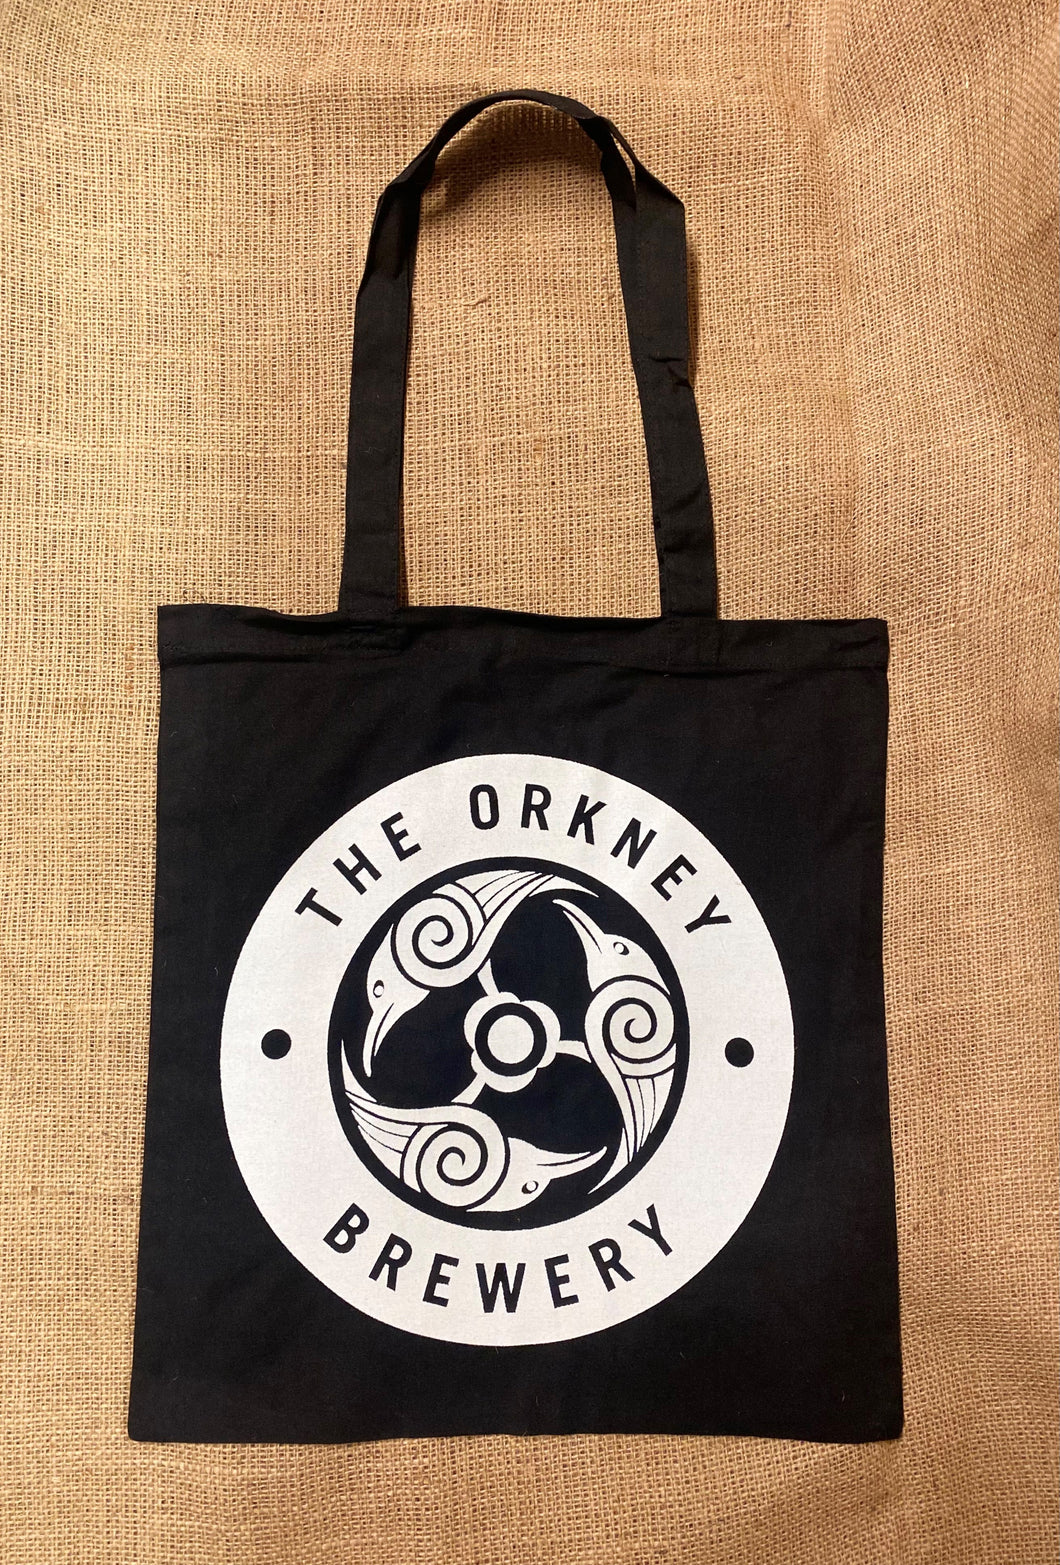 Orkney Brewery Tote Bag